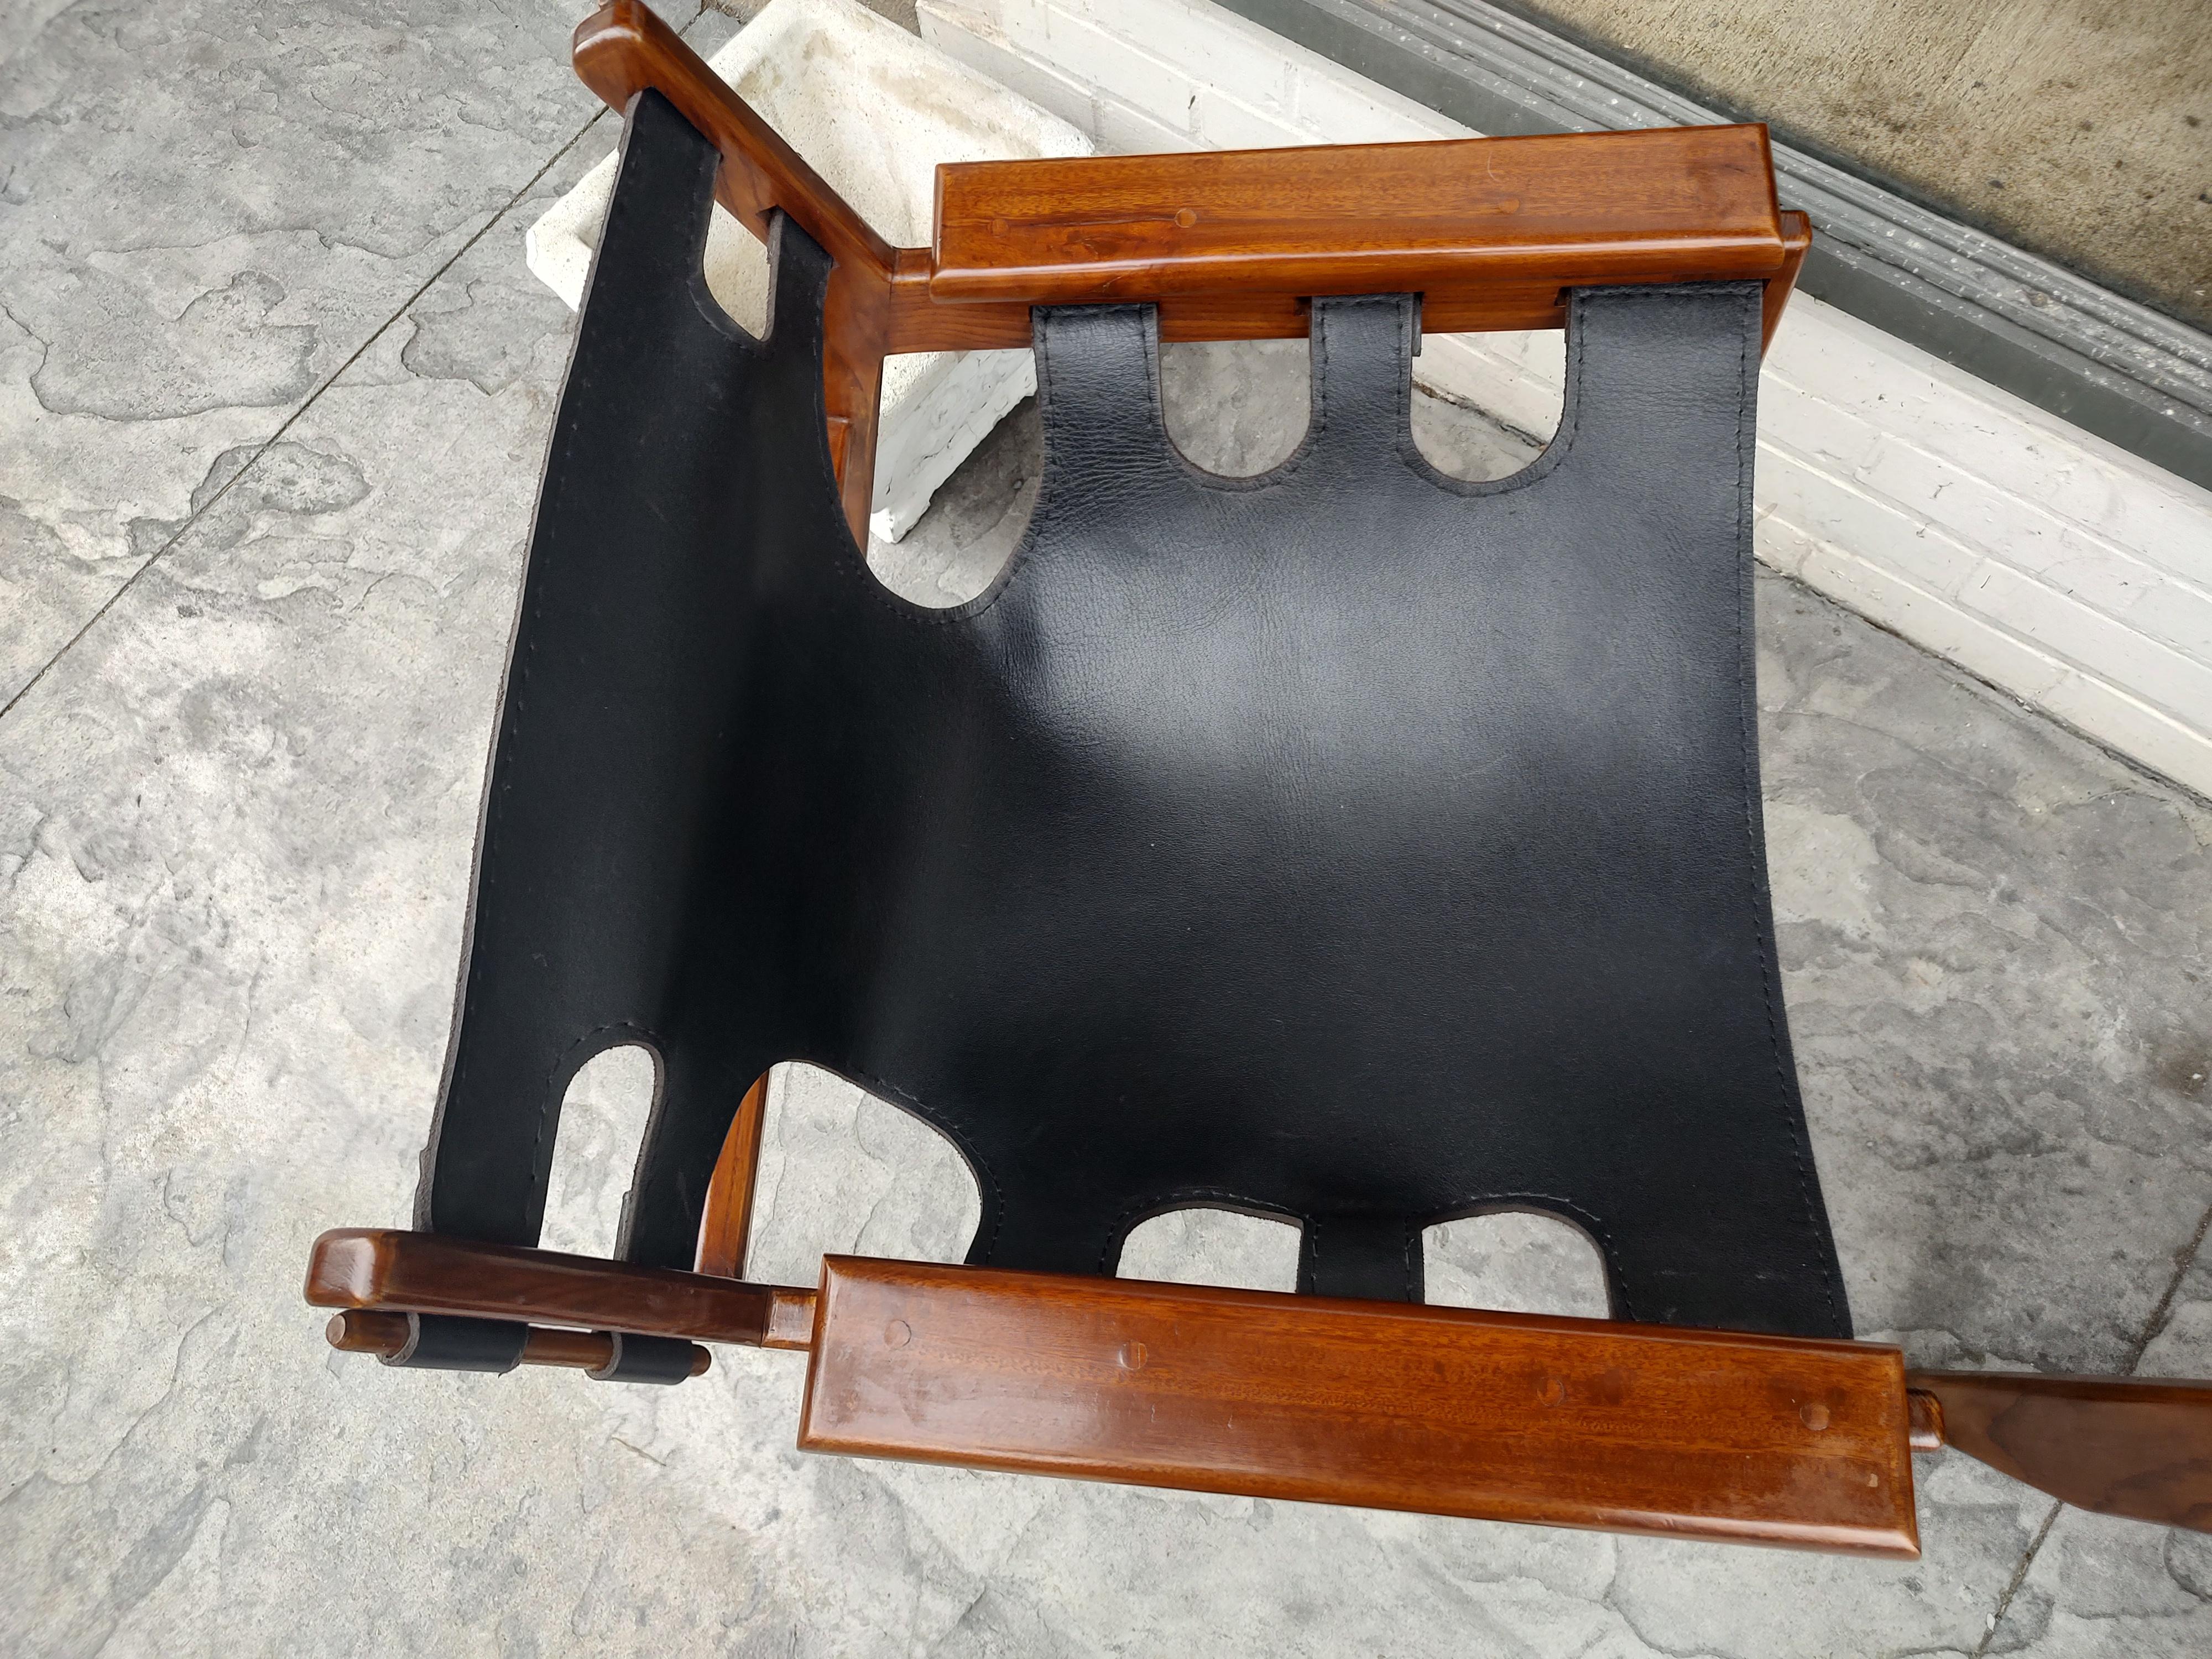 Fabulous and very elegant pair of lounge chairs by Sergio Rodrigues. The Killin Lounge chair was designed and produced in 1973. Created from Jacaranda this wood is now a protected species.
In excellent vintage condition with minimal wear.
Sold